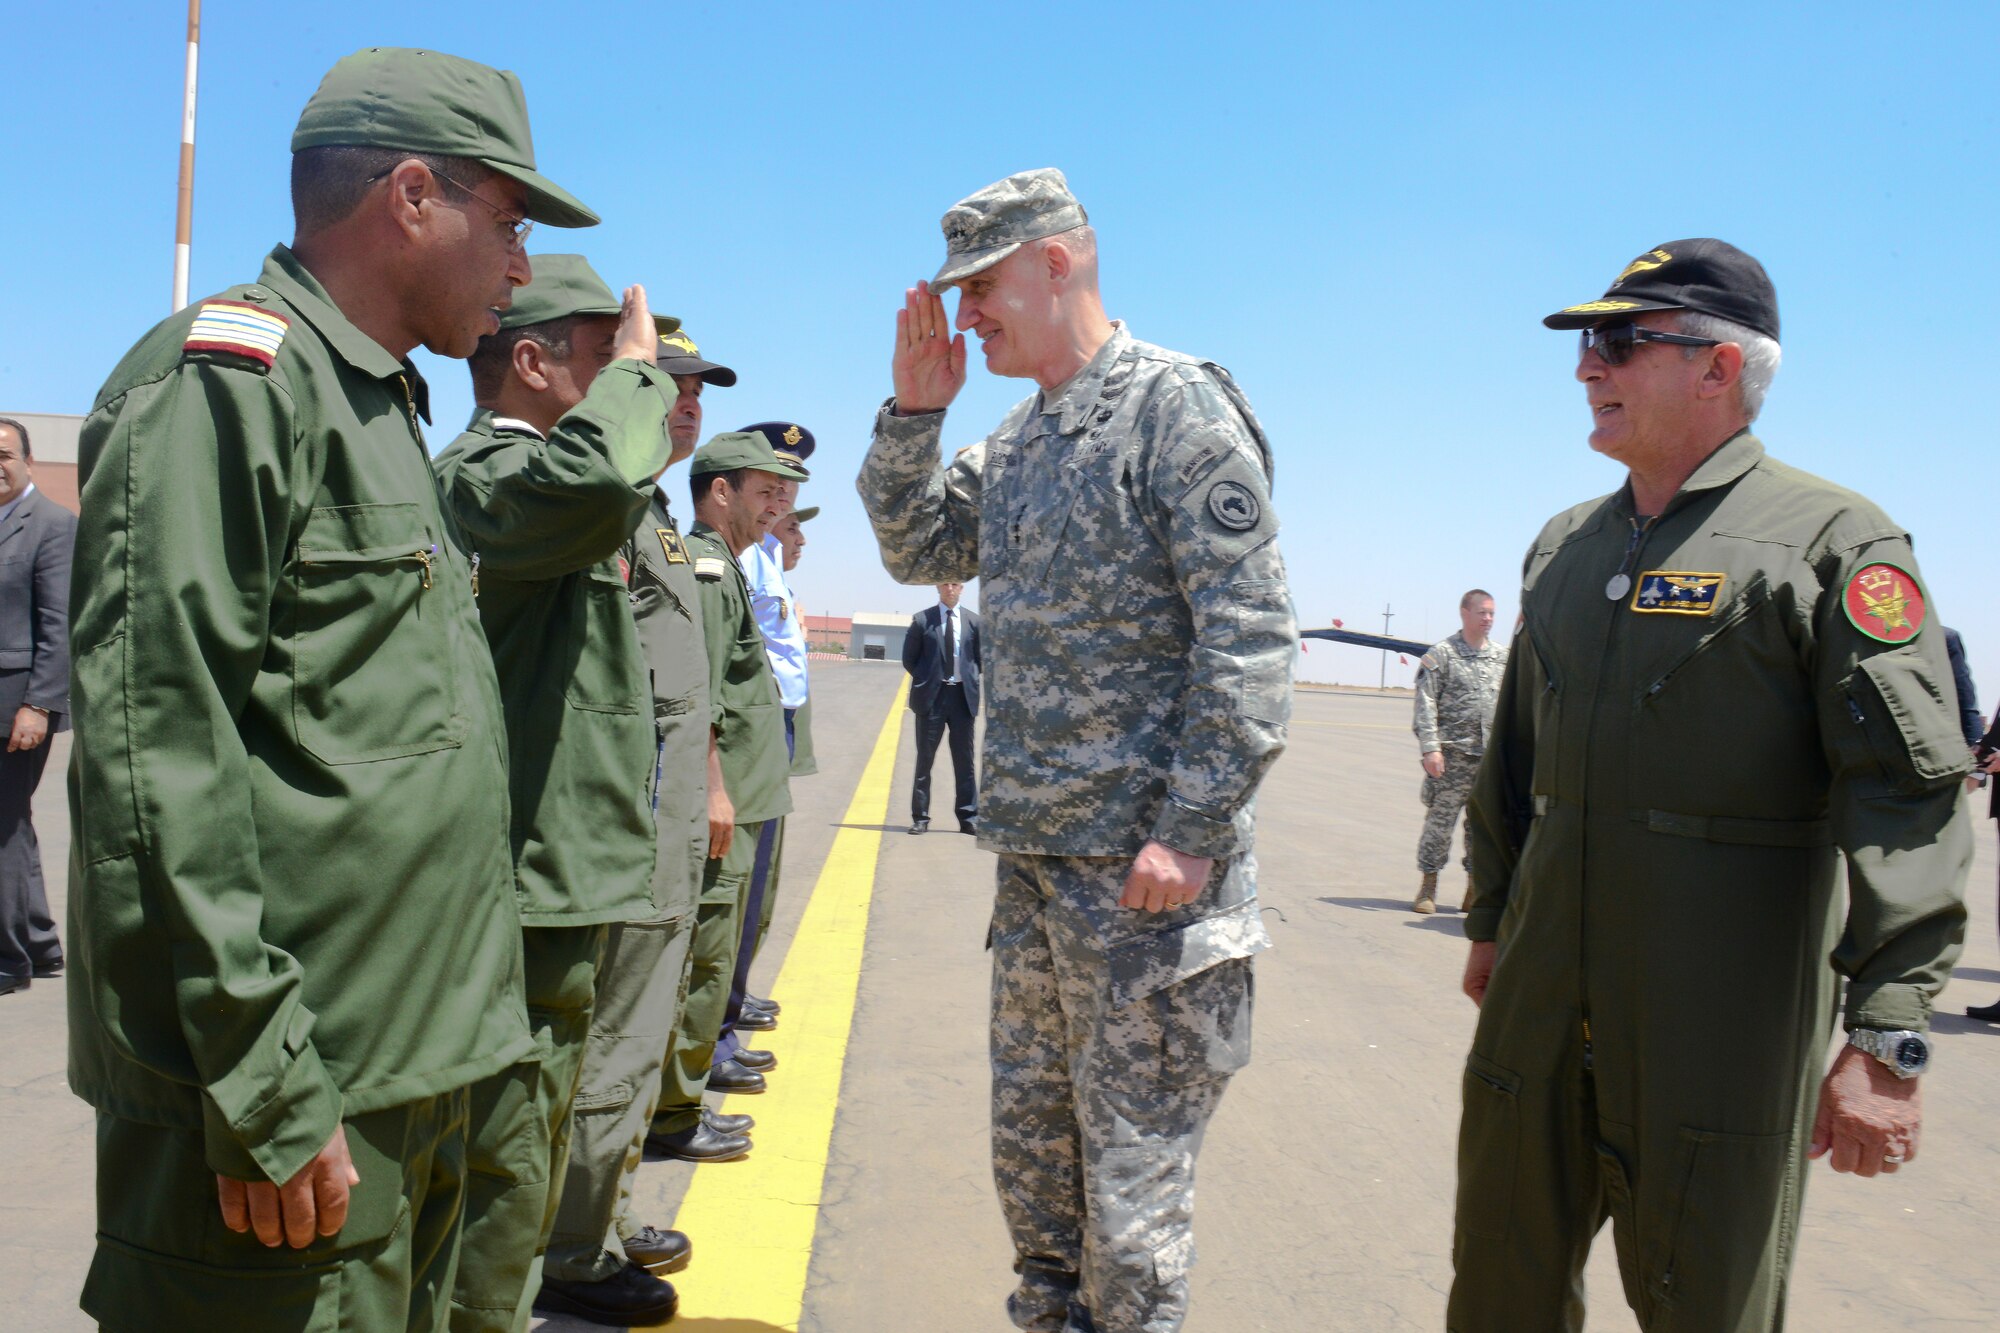 U.S. Army Gen. David Rodriguez, Africa Command commander, salutes Royal Moroccan Air Force members on the flight line at Ben Guerir Air Base, Morocco, May 20, 2015. Rodriguez received a base tour and an briefing on Exercise African Lion air training exercise. African Lion is a joint coalition exercise led by U.S. Marine Forces Europe and Africa with a mission of building partnerships and maximizing interoperability with allies.. (U.S. Air Force photo by Staff Sgt. Eboni Reams/Released)